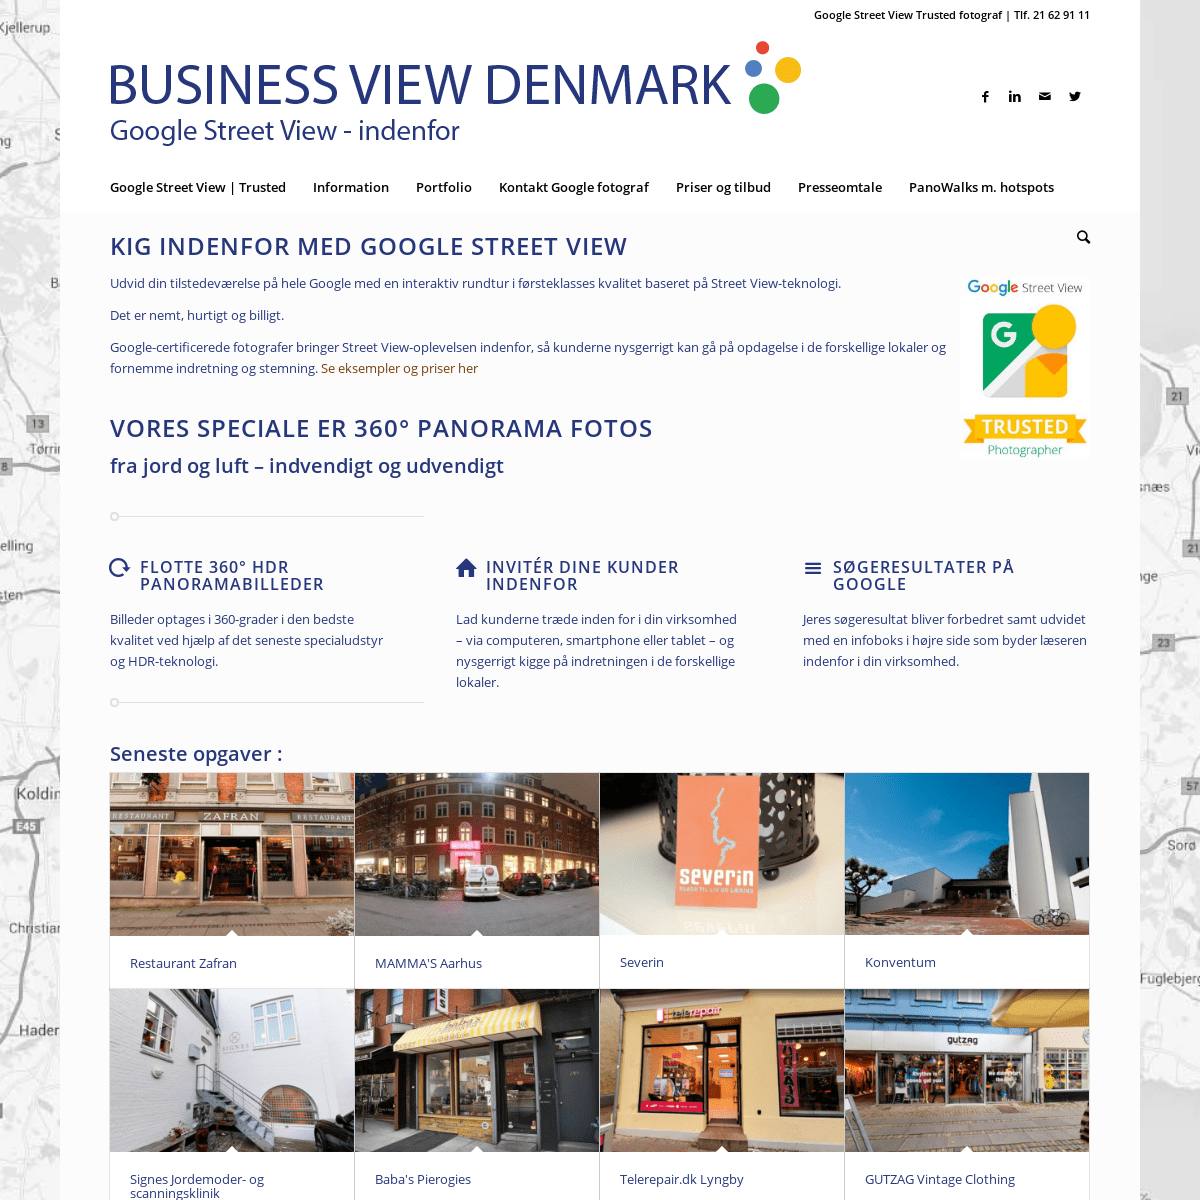 A complete backup of businessviewdenmark.dk